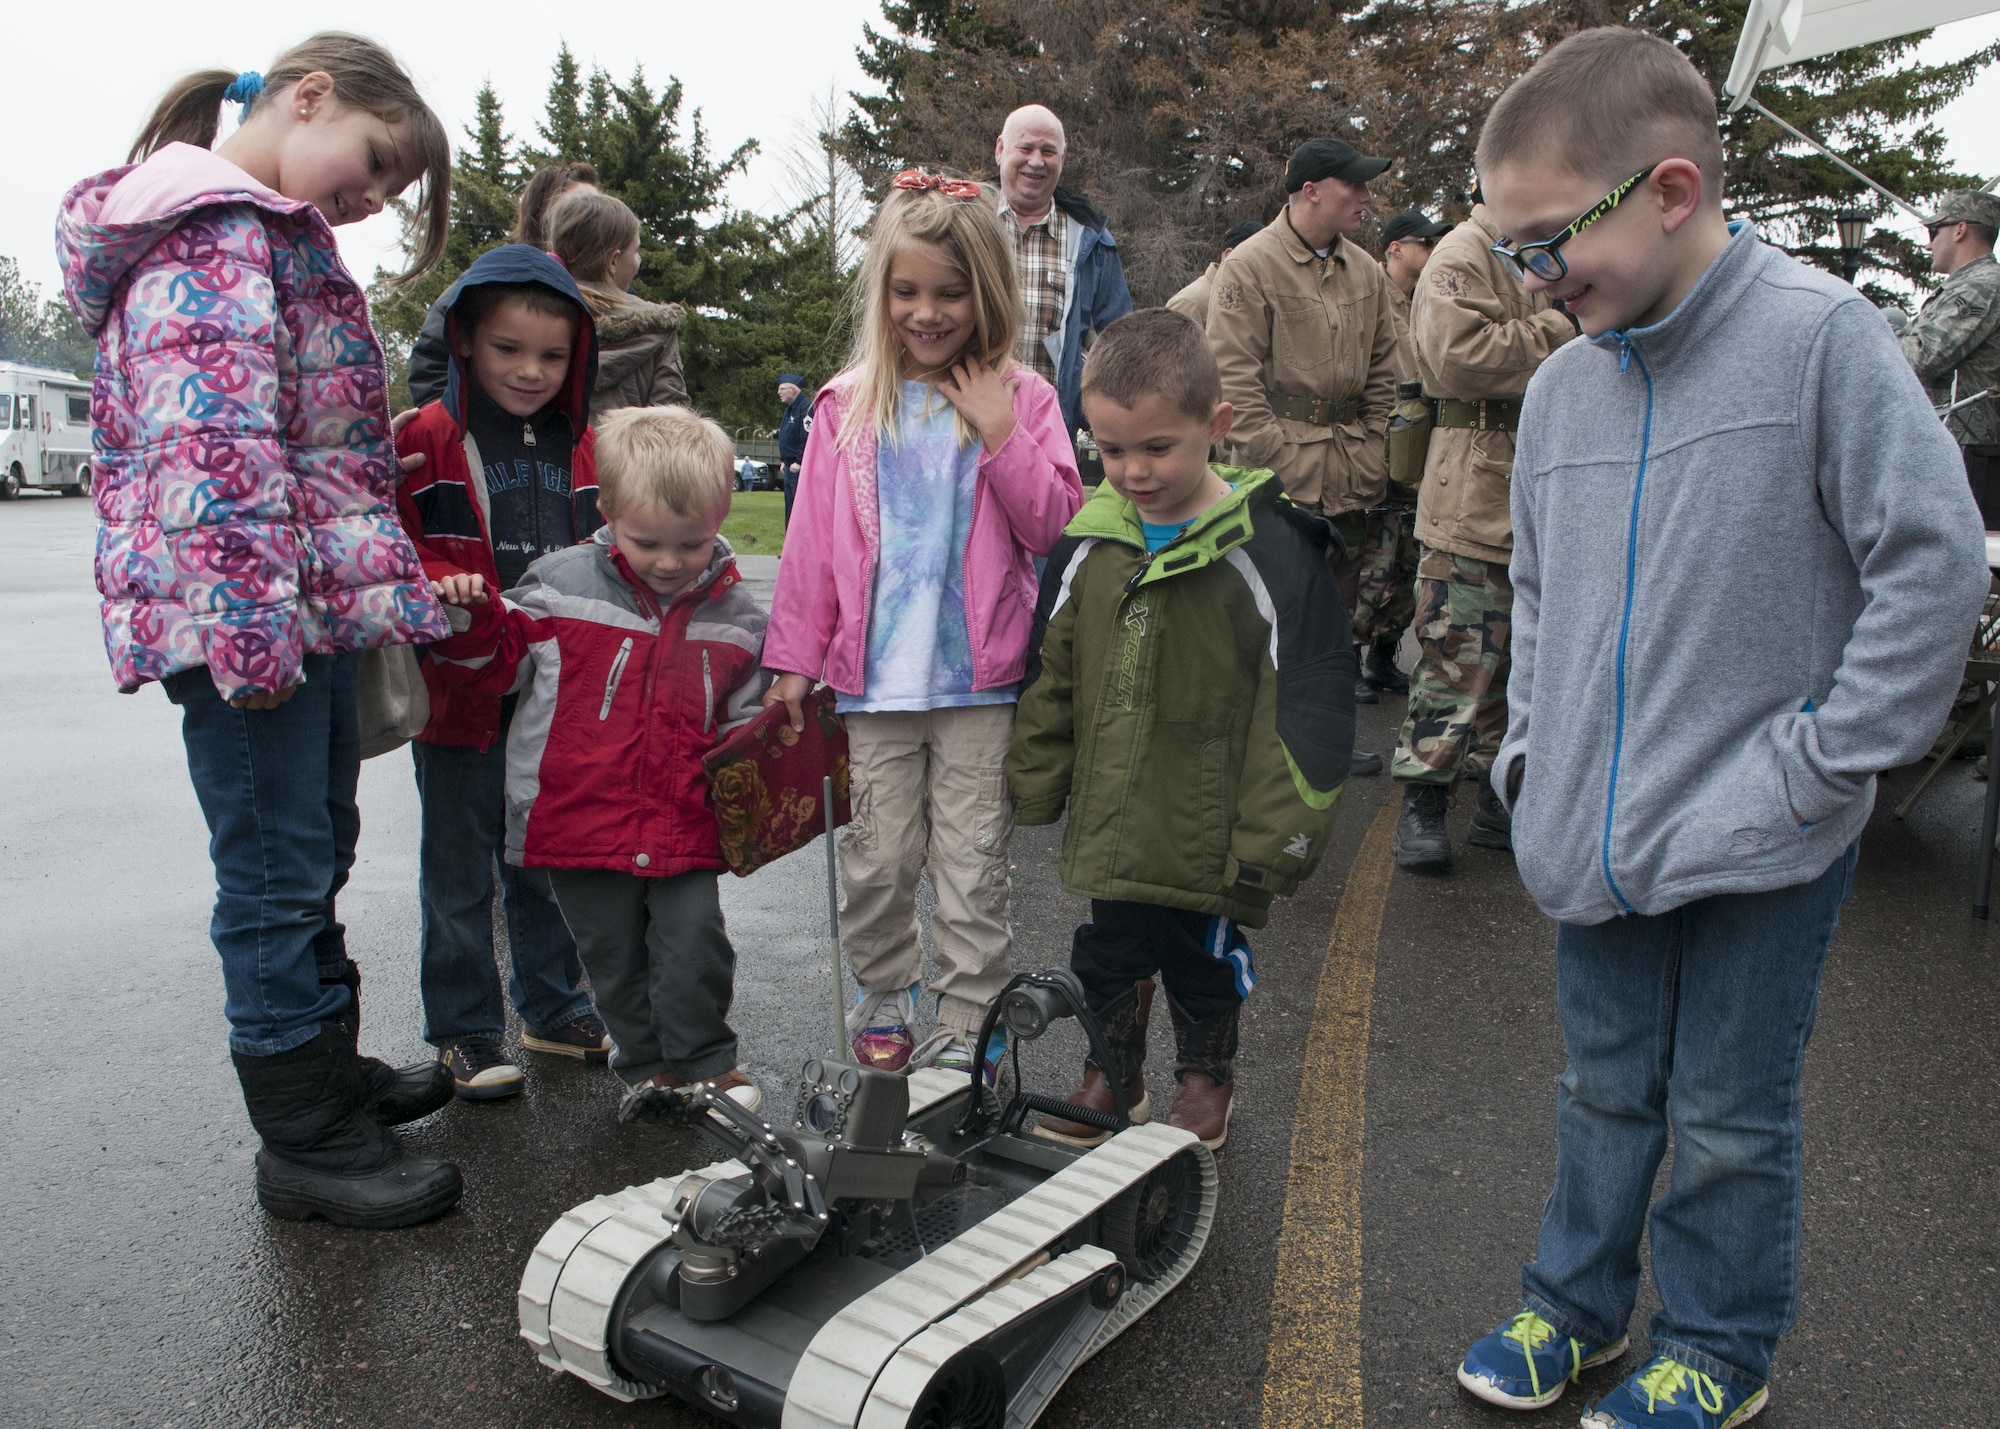 Children gather around the 90th Civil Engineers Squadron Explosive Ordnance Disposal Pacbot 310 during the city’s annual Armed Forces Day celebration at the Cheyenne, Wyo., Veterans Administration Medical Center May 14, 2016. Several units from F.E. Warren Air Force Base, that include the 90th Medical Group and 90th Security Forces Group, showcased their capabilities and equipment to the local community. (U.S. Air Force photo by Airman 1st Class Malcolm Mayfield)